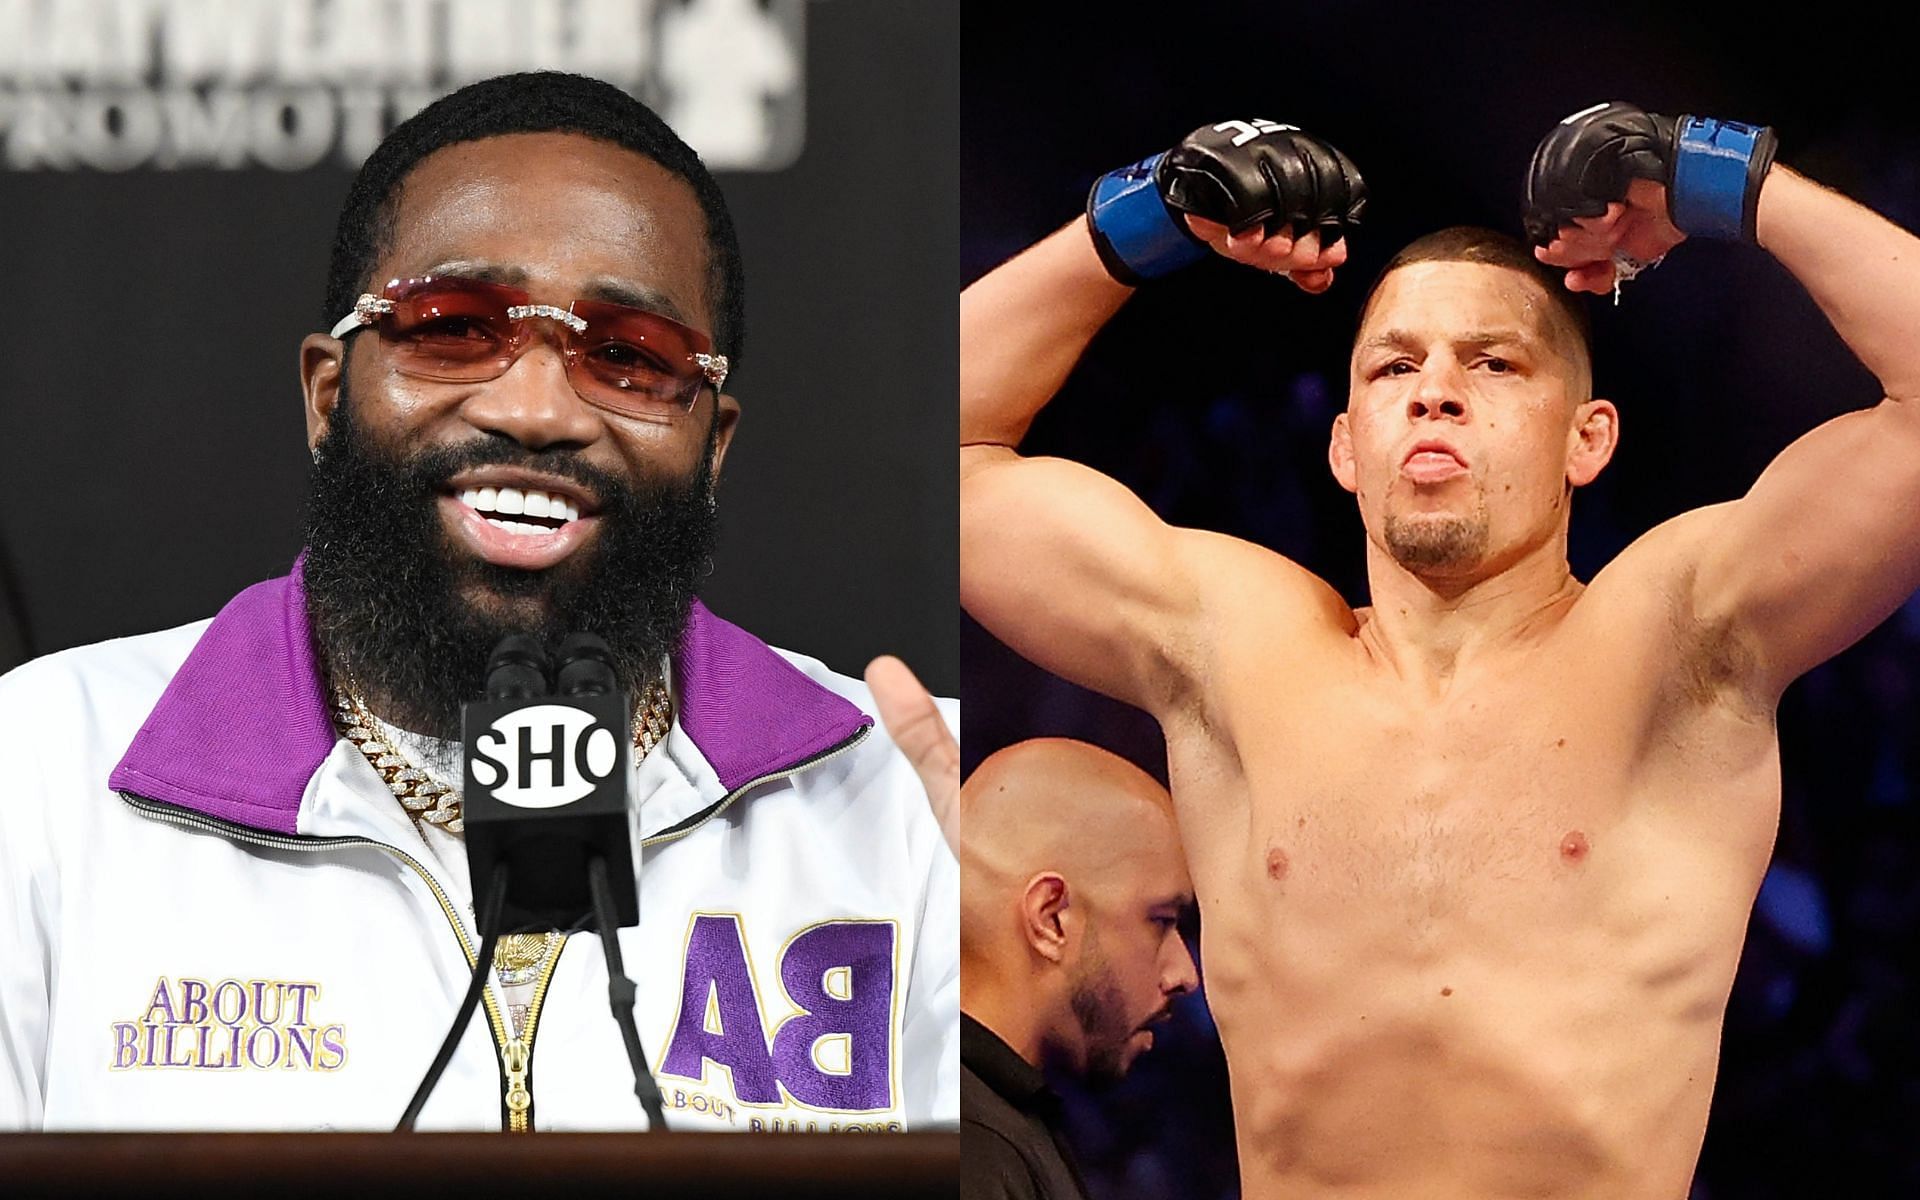 Adrien Broner (left) and Nate Diaz (right) (Image credits Getty Images)